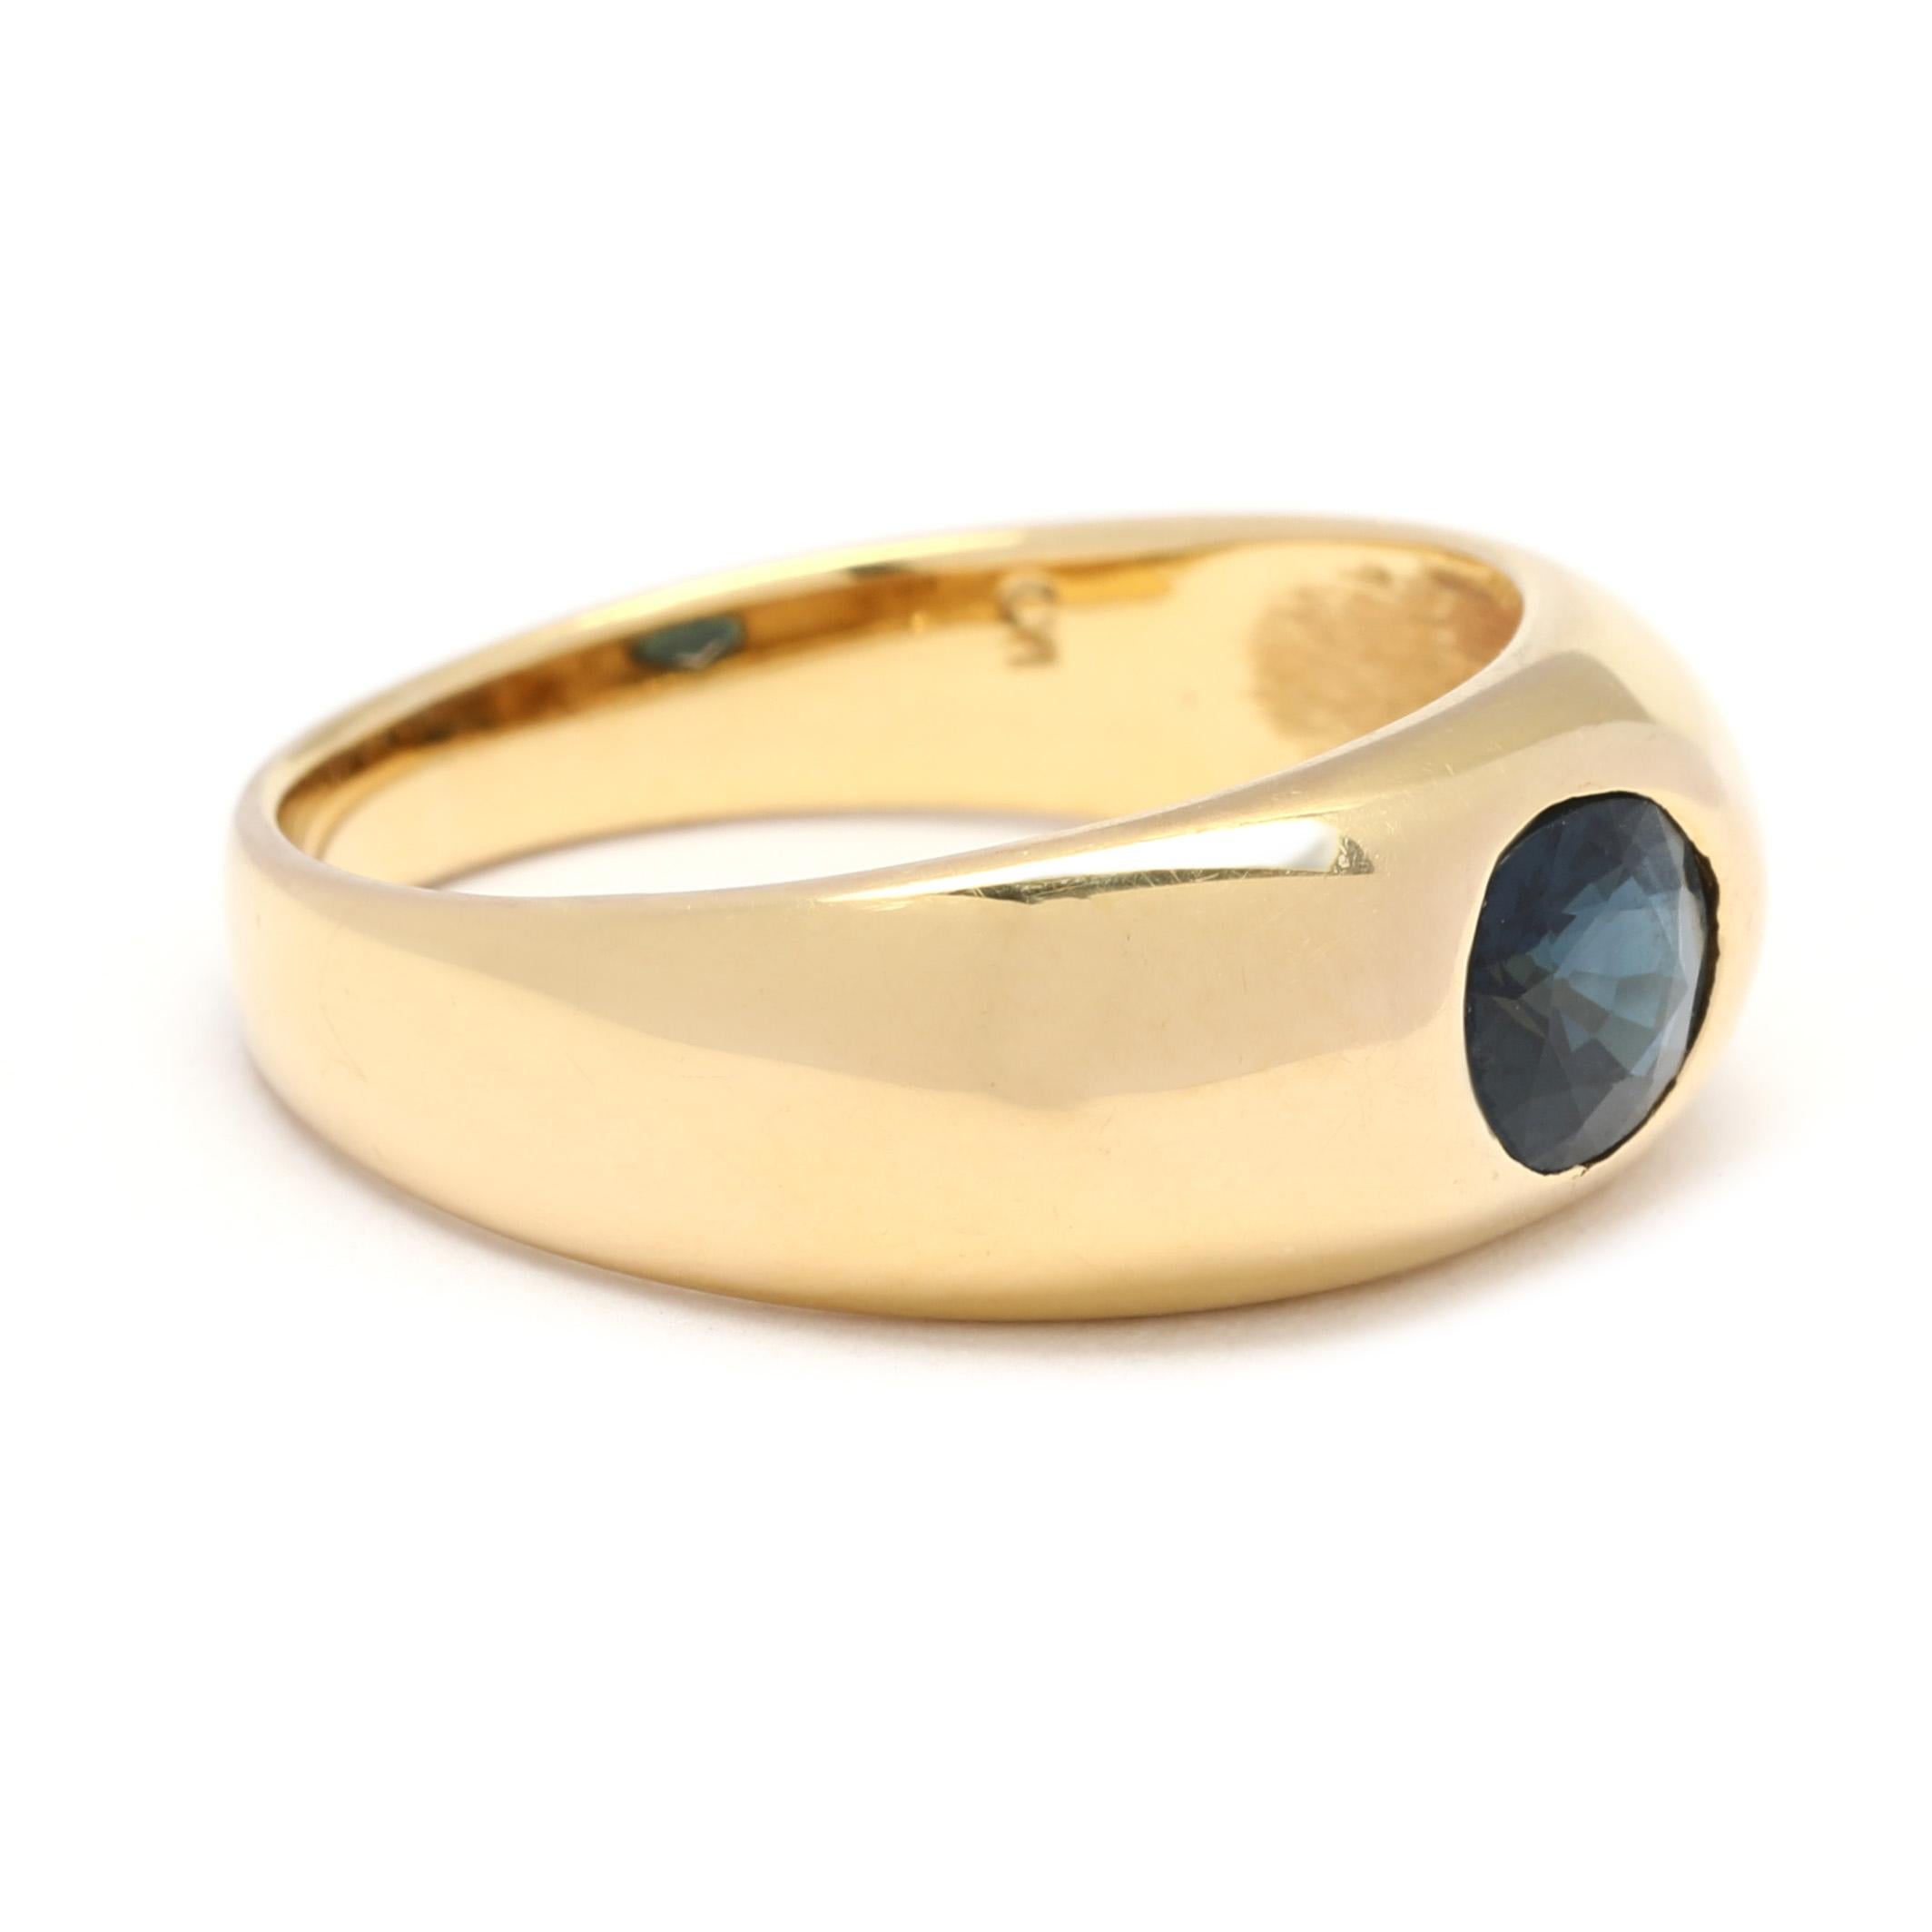 Make sure your jewelry sparkles and stands out! This rustic-style 0.75ct oval blue sapphire ring is the perfect accessory for any occasion. Crafted from 18K yellow gold, the flush set sapphire band is horizontal and cozy with a brilliant emerald cut